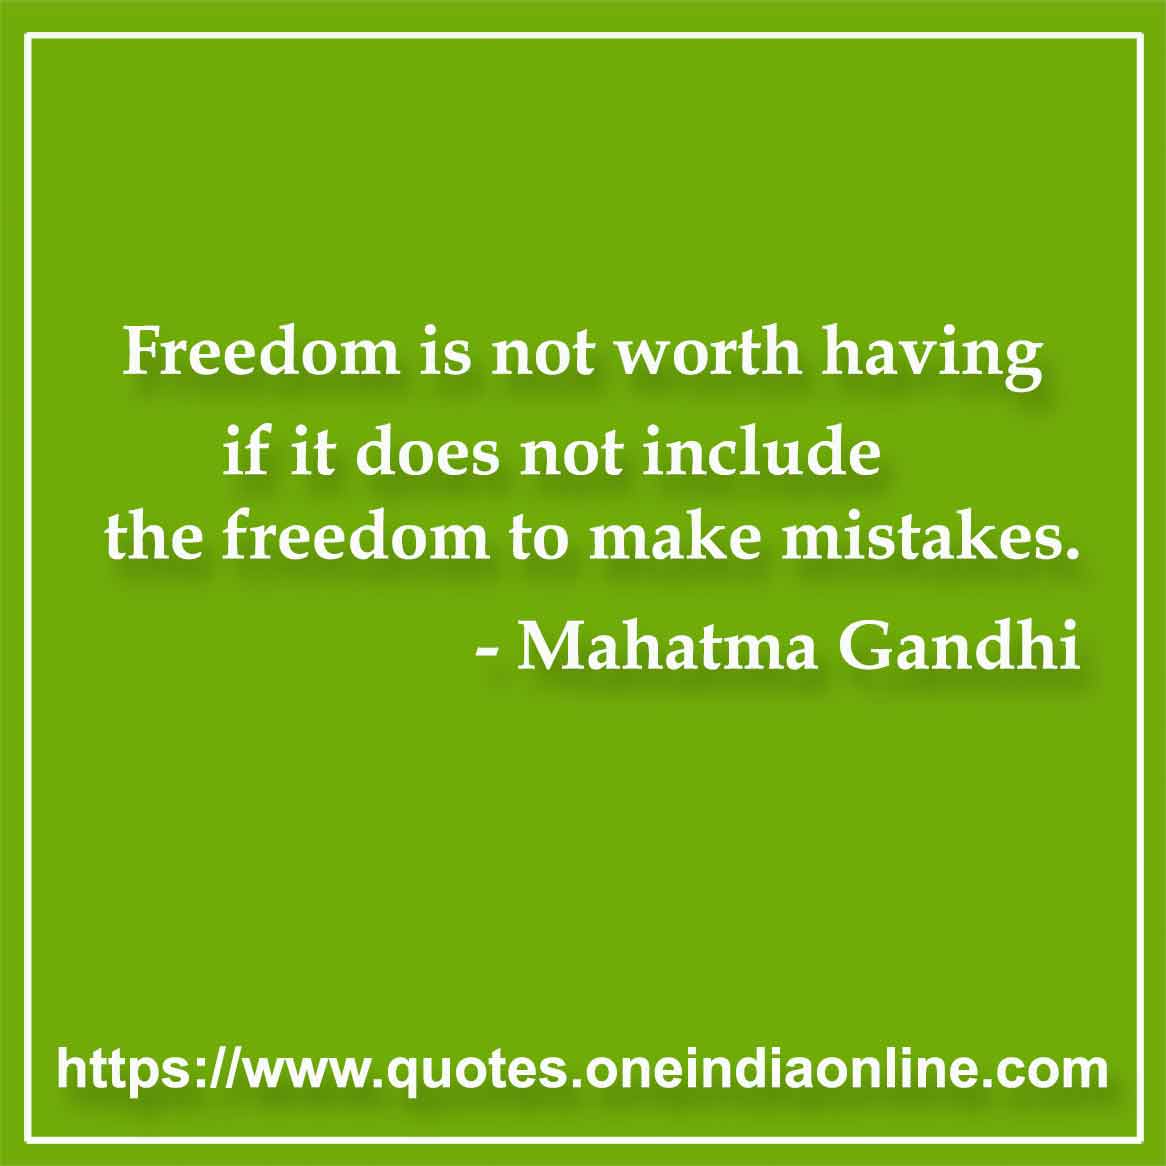 Freedom is not worth having if it does not include the freedom to make mistakes.

- Mahatma Gandhi Quotes